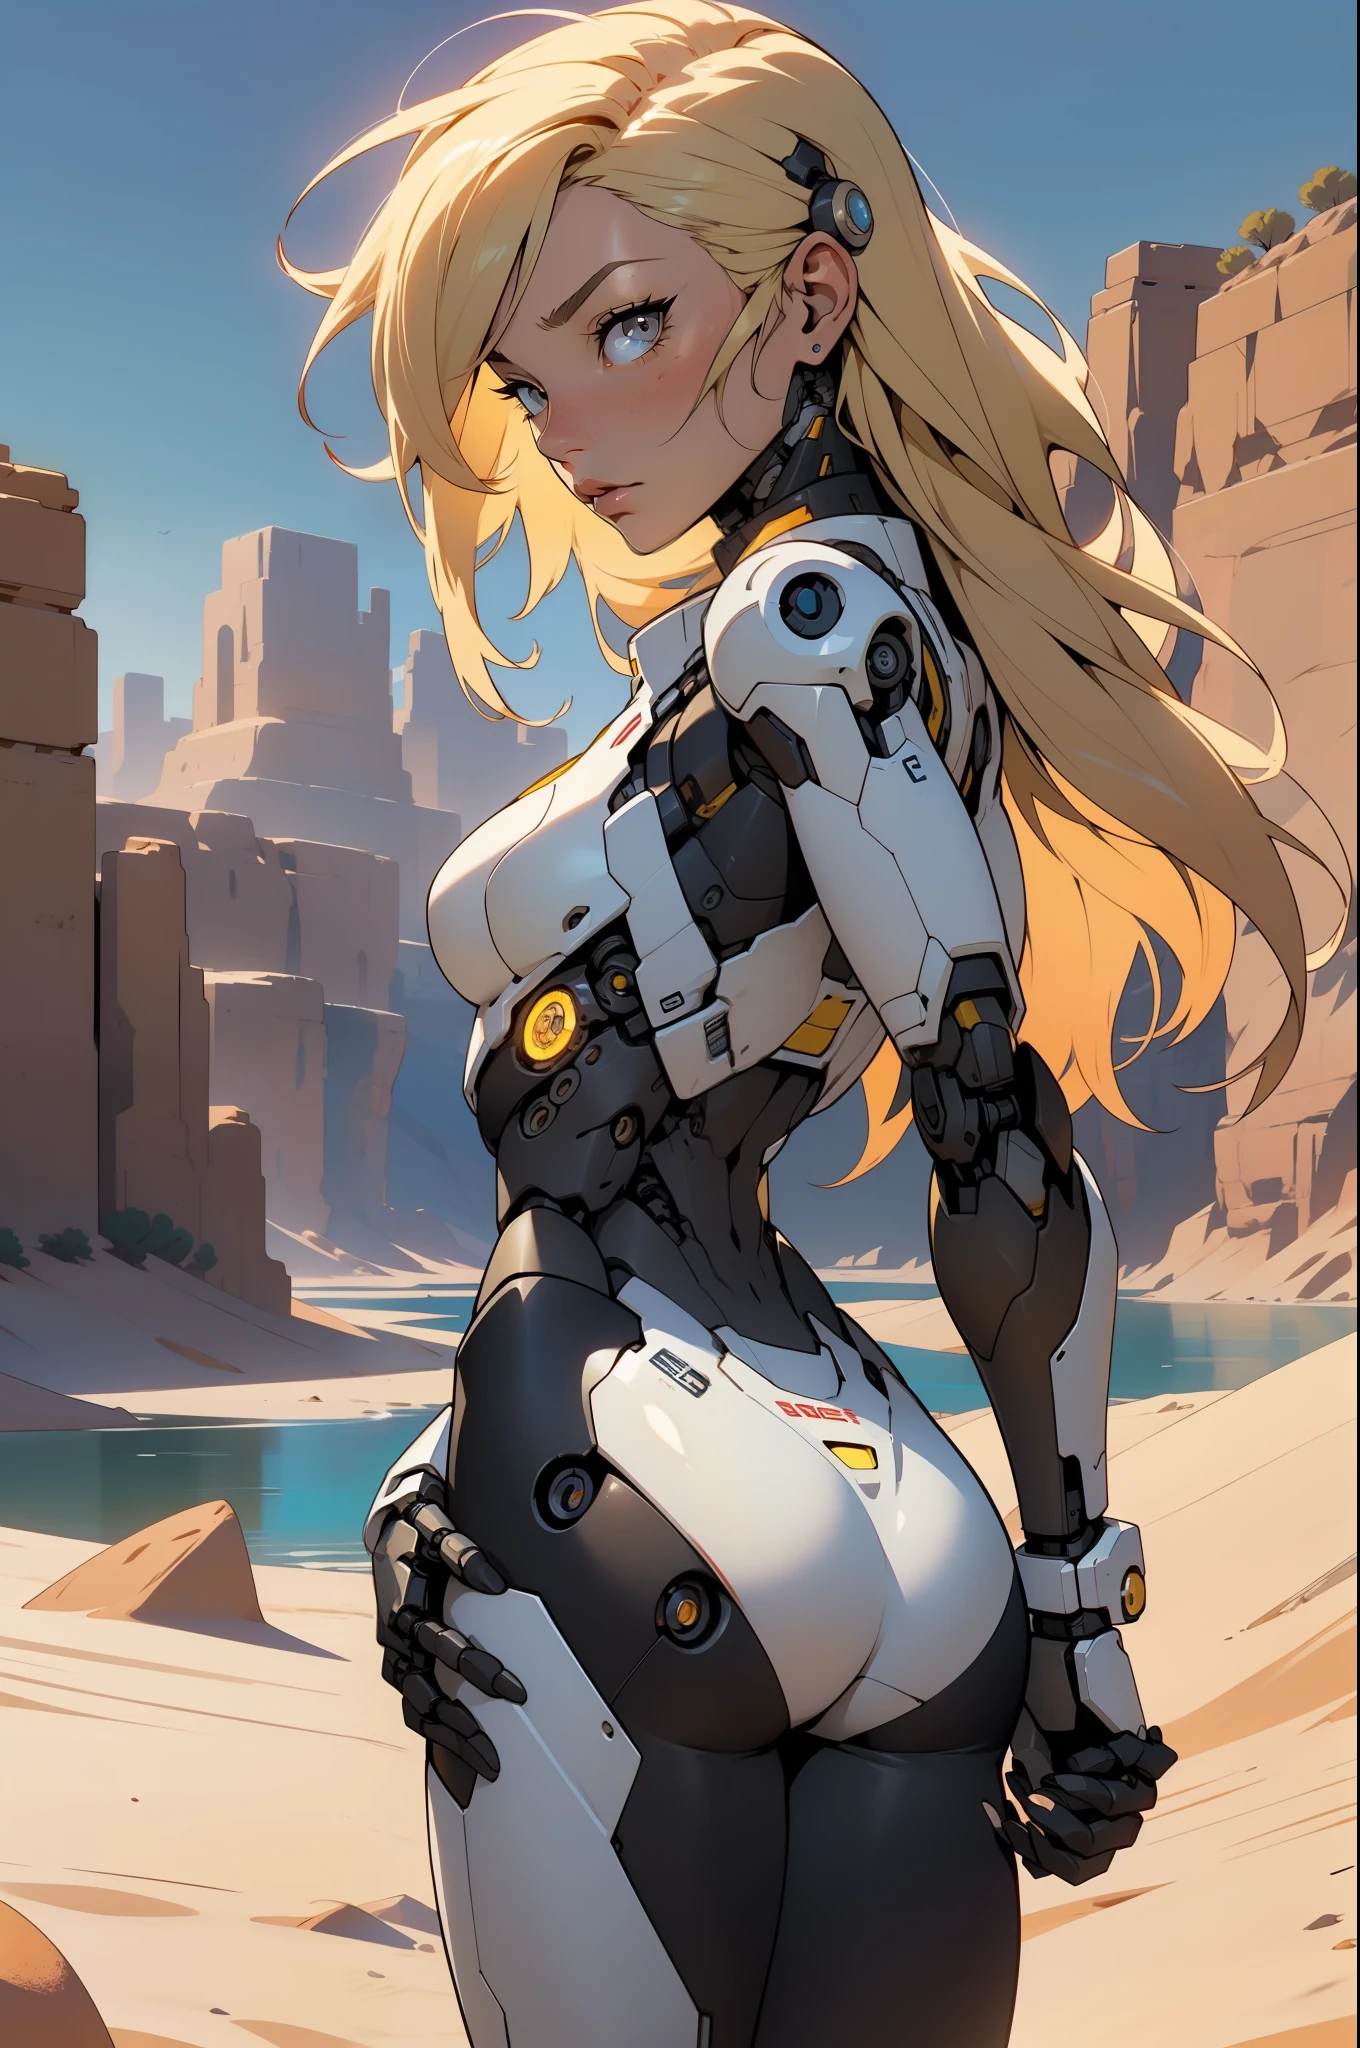 high quality, 4k, masterpiece, beautiful, cyborg girl, cowboy shot, dull eyes, back side, turning around to look at viewer, long blonde hair, girl, small breasts, fit thigh, robotic arms, robotic body, cyborg body, yellow accent, red accent, intricate detail, joint, detailed lines, robotic detail, holding fist up, holding hand up as fist, color robotic parts, robotic parts with color, perfect fingers, on a desert planet, sunny background, colorful desert, a river or a lake in the background